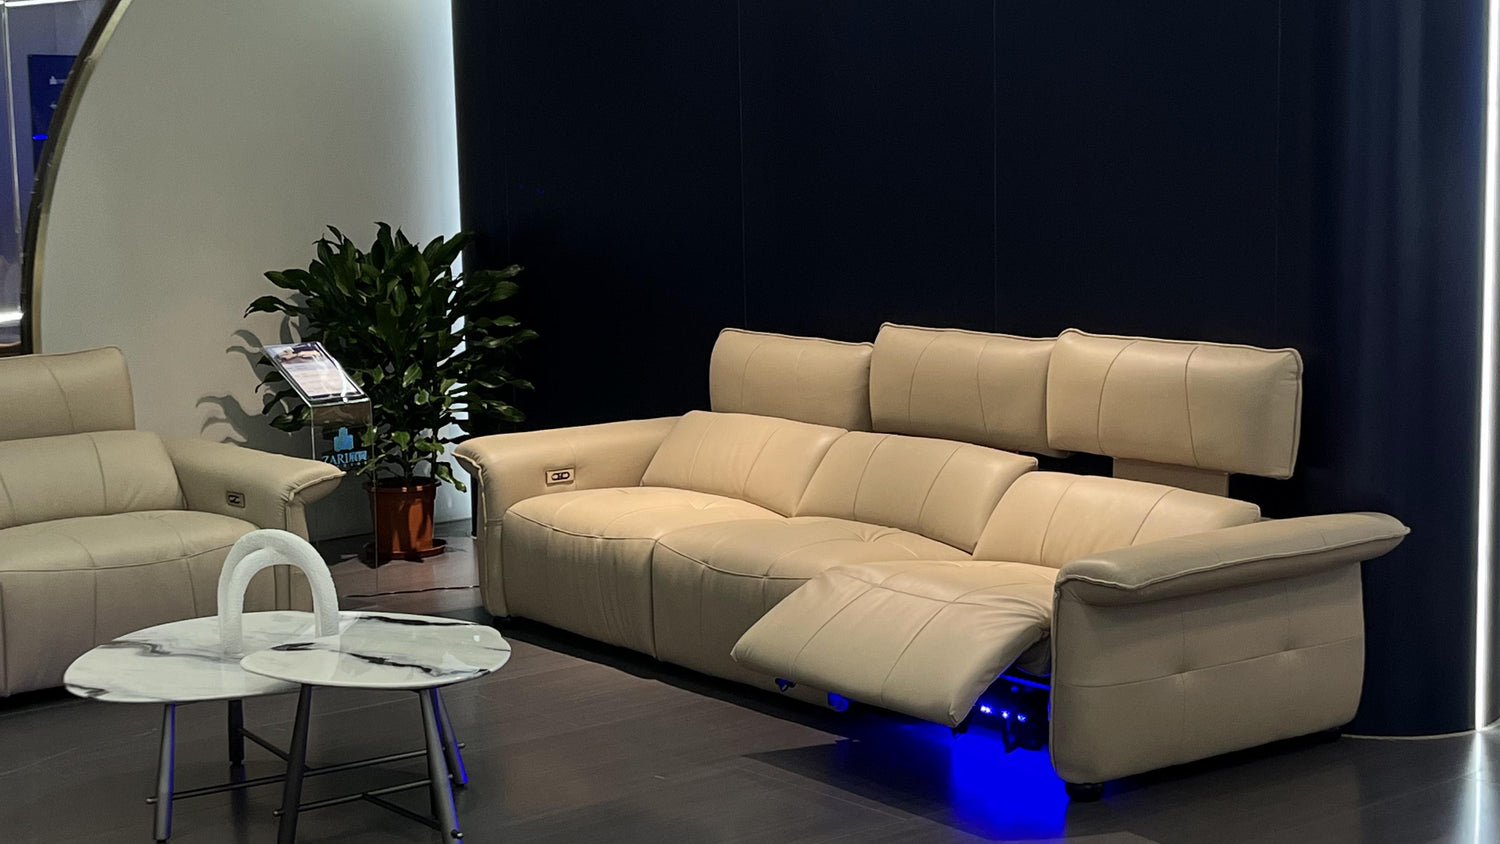 Understanding Comfort: Choosing the Perfect Home Theater Sofa for Every Family Member